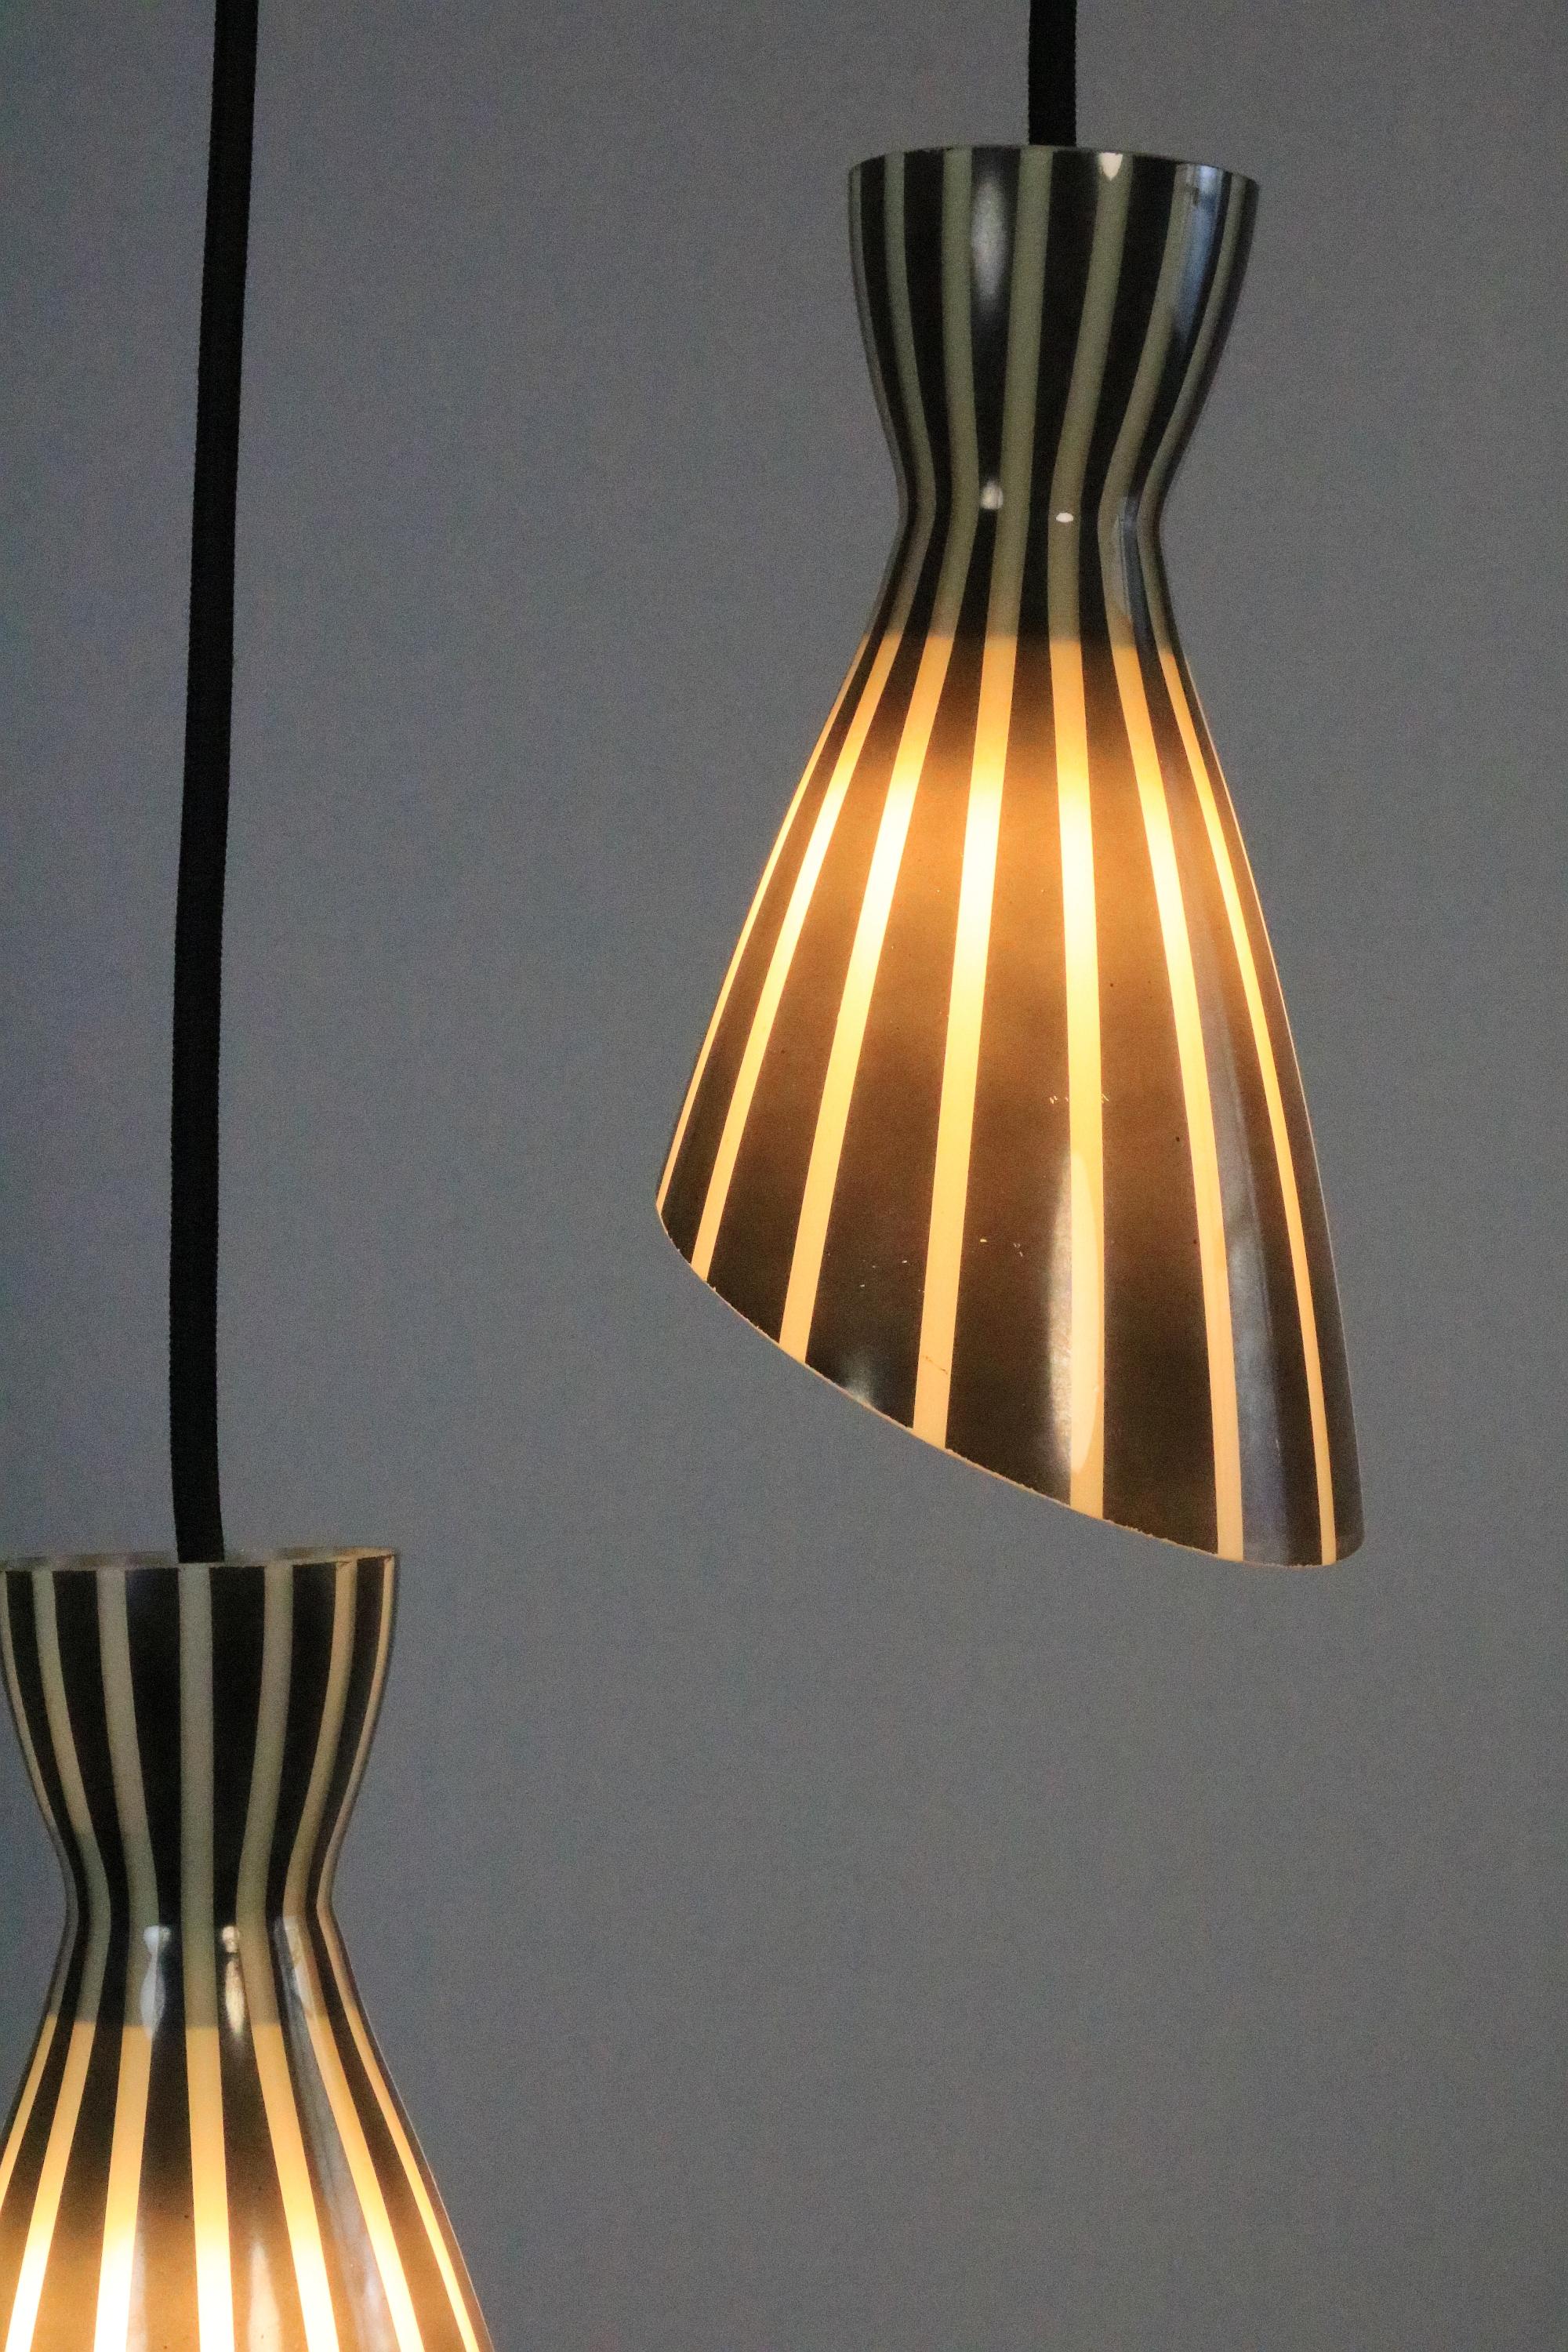 Set of 2 Glass Hanging Lamps, Black and White Striped, Original 1950s For Sale 3